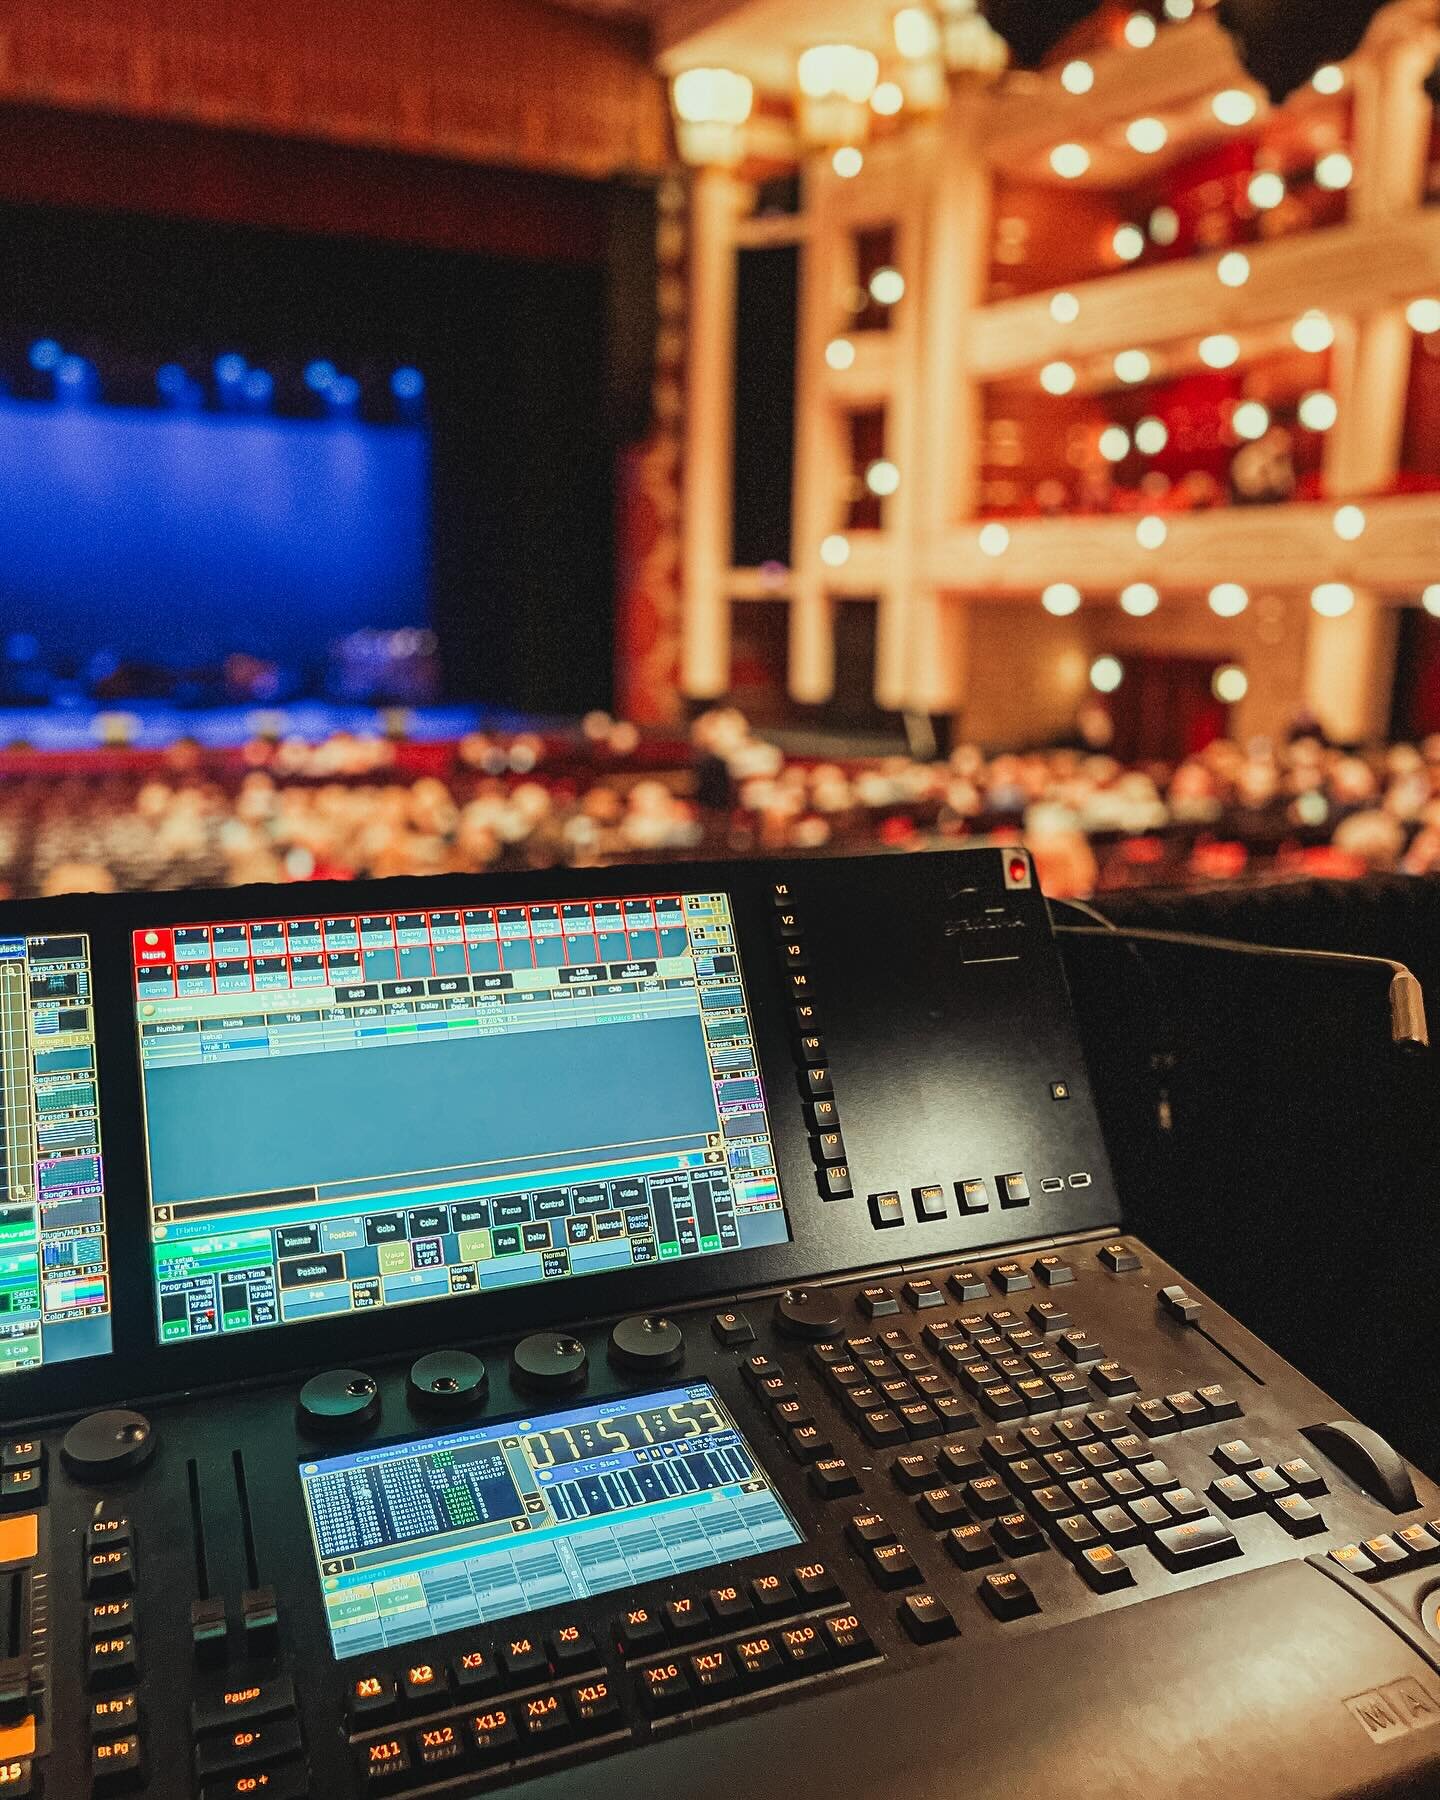 Another one! LW was privileged to bring some magic to the beautiful @kraviscenter in West Palm, FL!

#lw #livewire #livewirepronj #lighting #lightingdesign #lightingdesigner #lightingprogramming #lightingprogrammer #concert #liveevent #liveevents